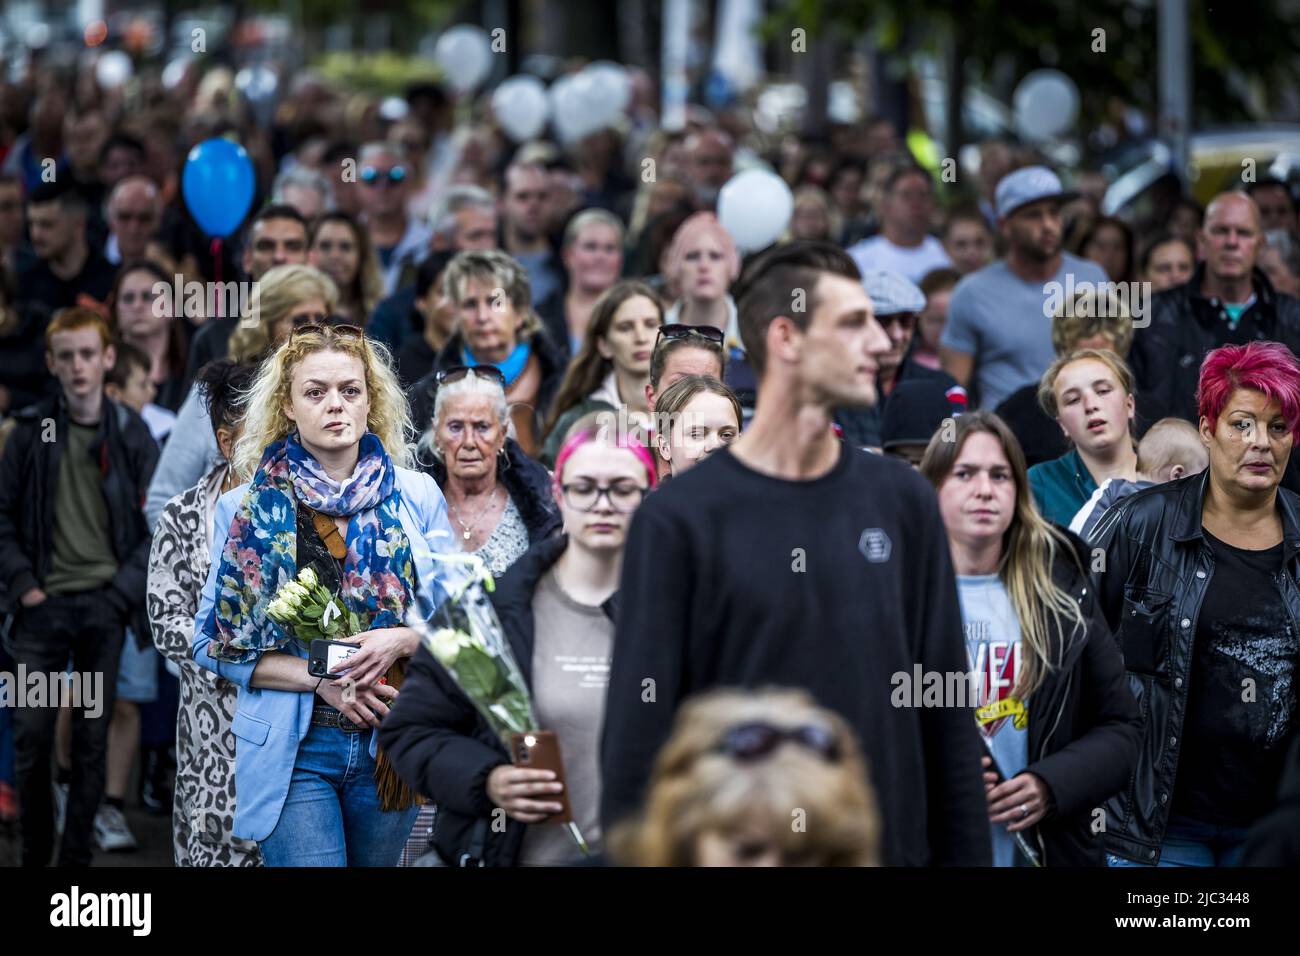 2022-06-09 18:58:02 MAASTRICHT - Participants in a silent march in memory of 9-year-old Gino in the neighborhood where he lived. The boy disappeared from a playground on June 1, and his remains were found a few days later near a house. A 22-year-old suspect has been arrested. ANP MARCEL VAN HOORN netherlands out - belgium out Stock Photo